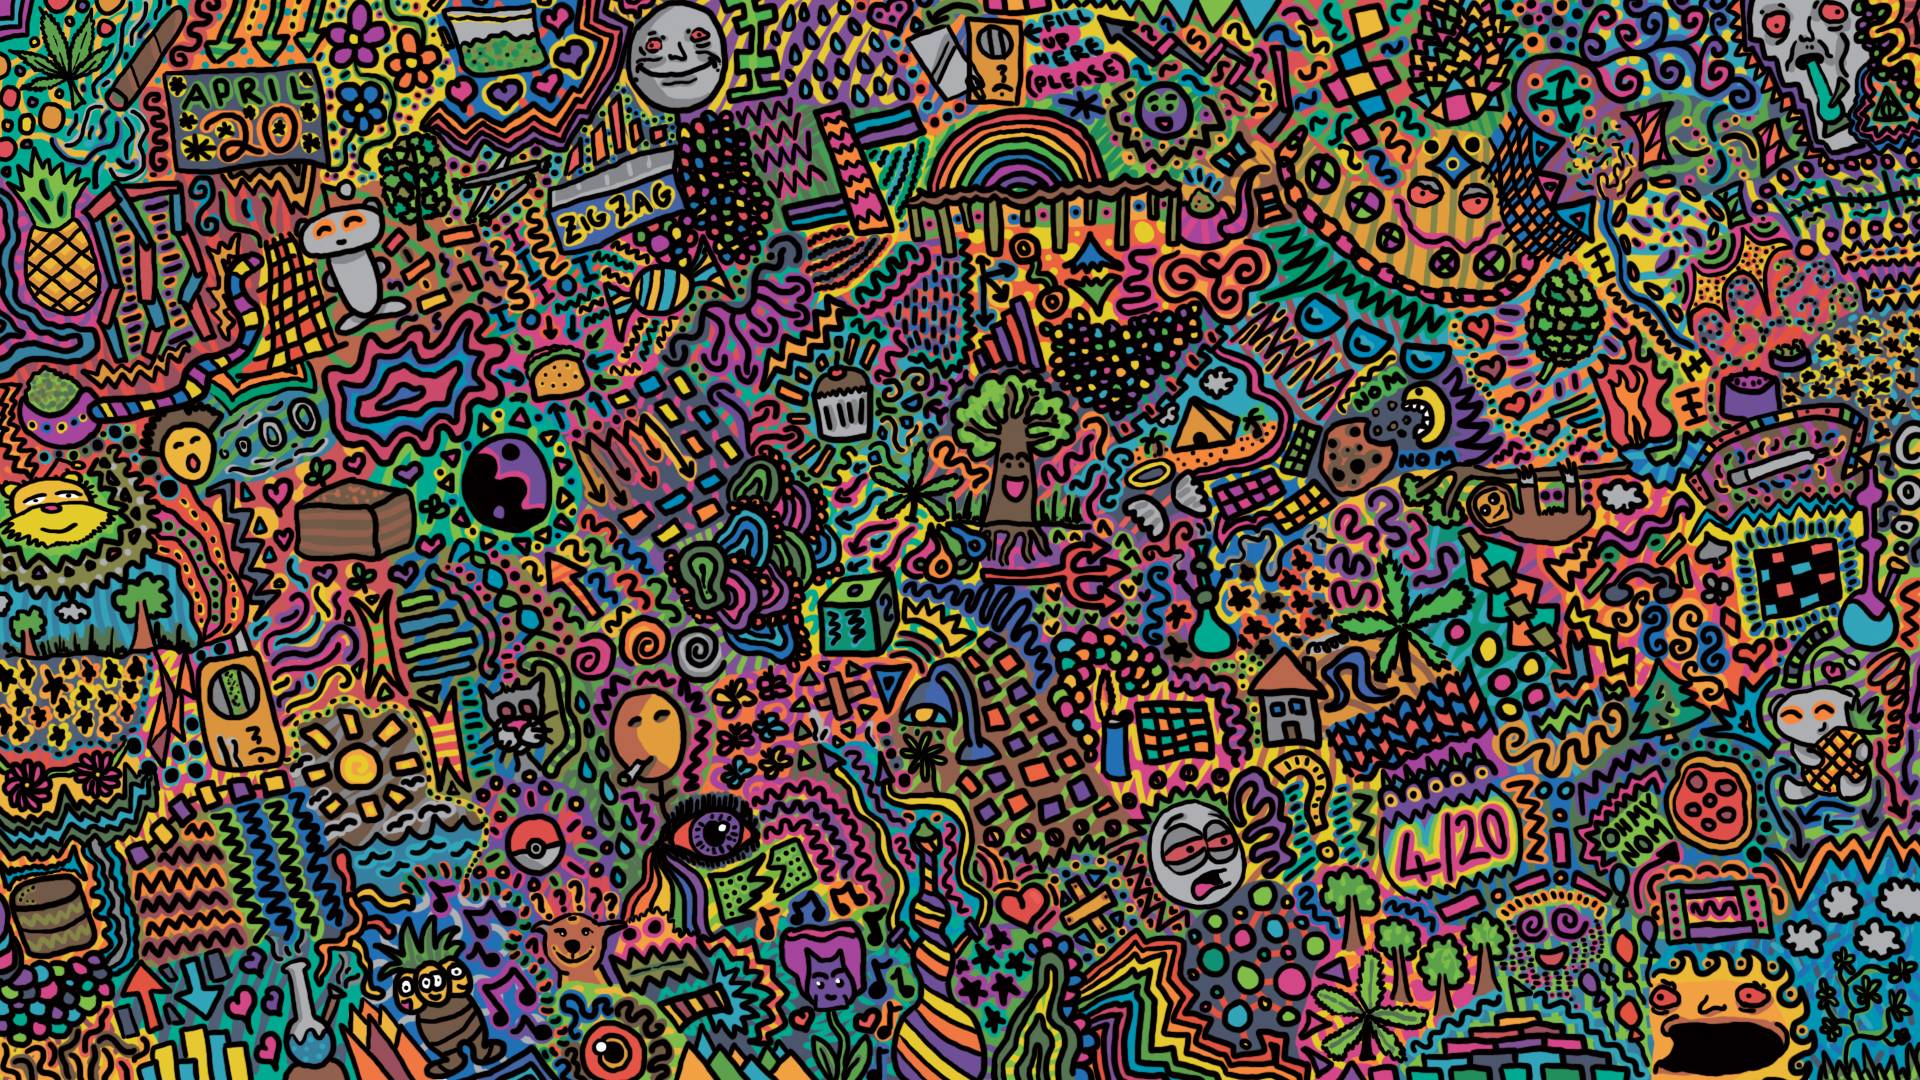 http://imgbucket.com/pages/p/psychedelic-art-tumblr-wallpaper/ | m ...